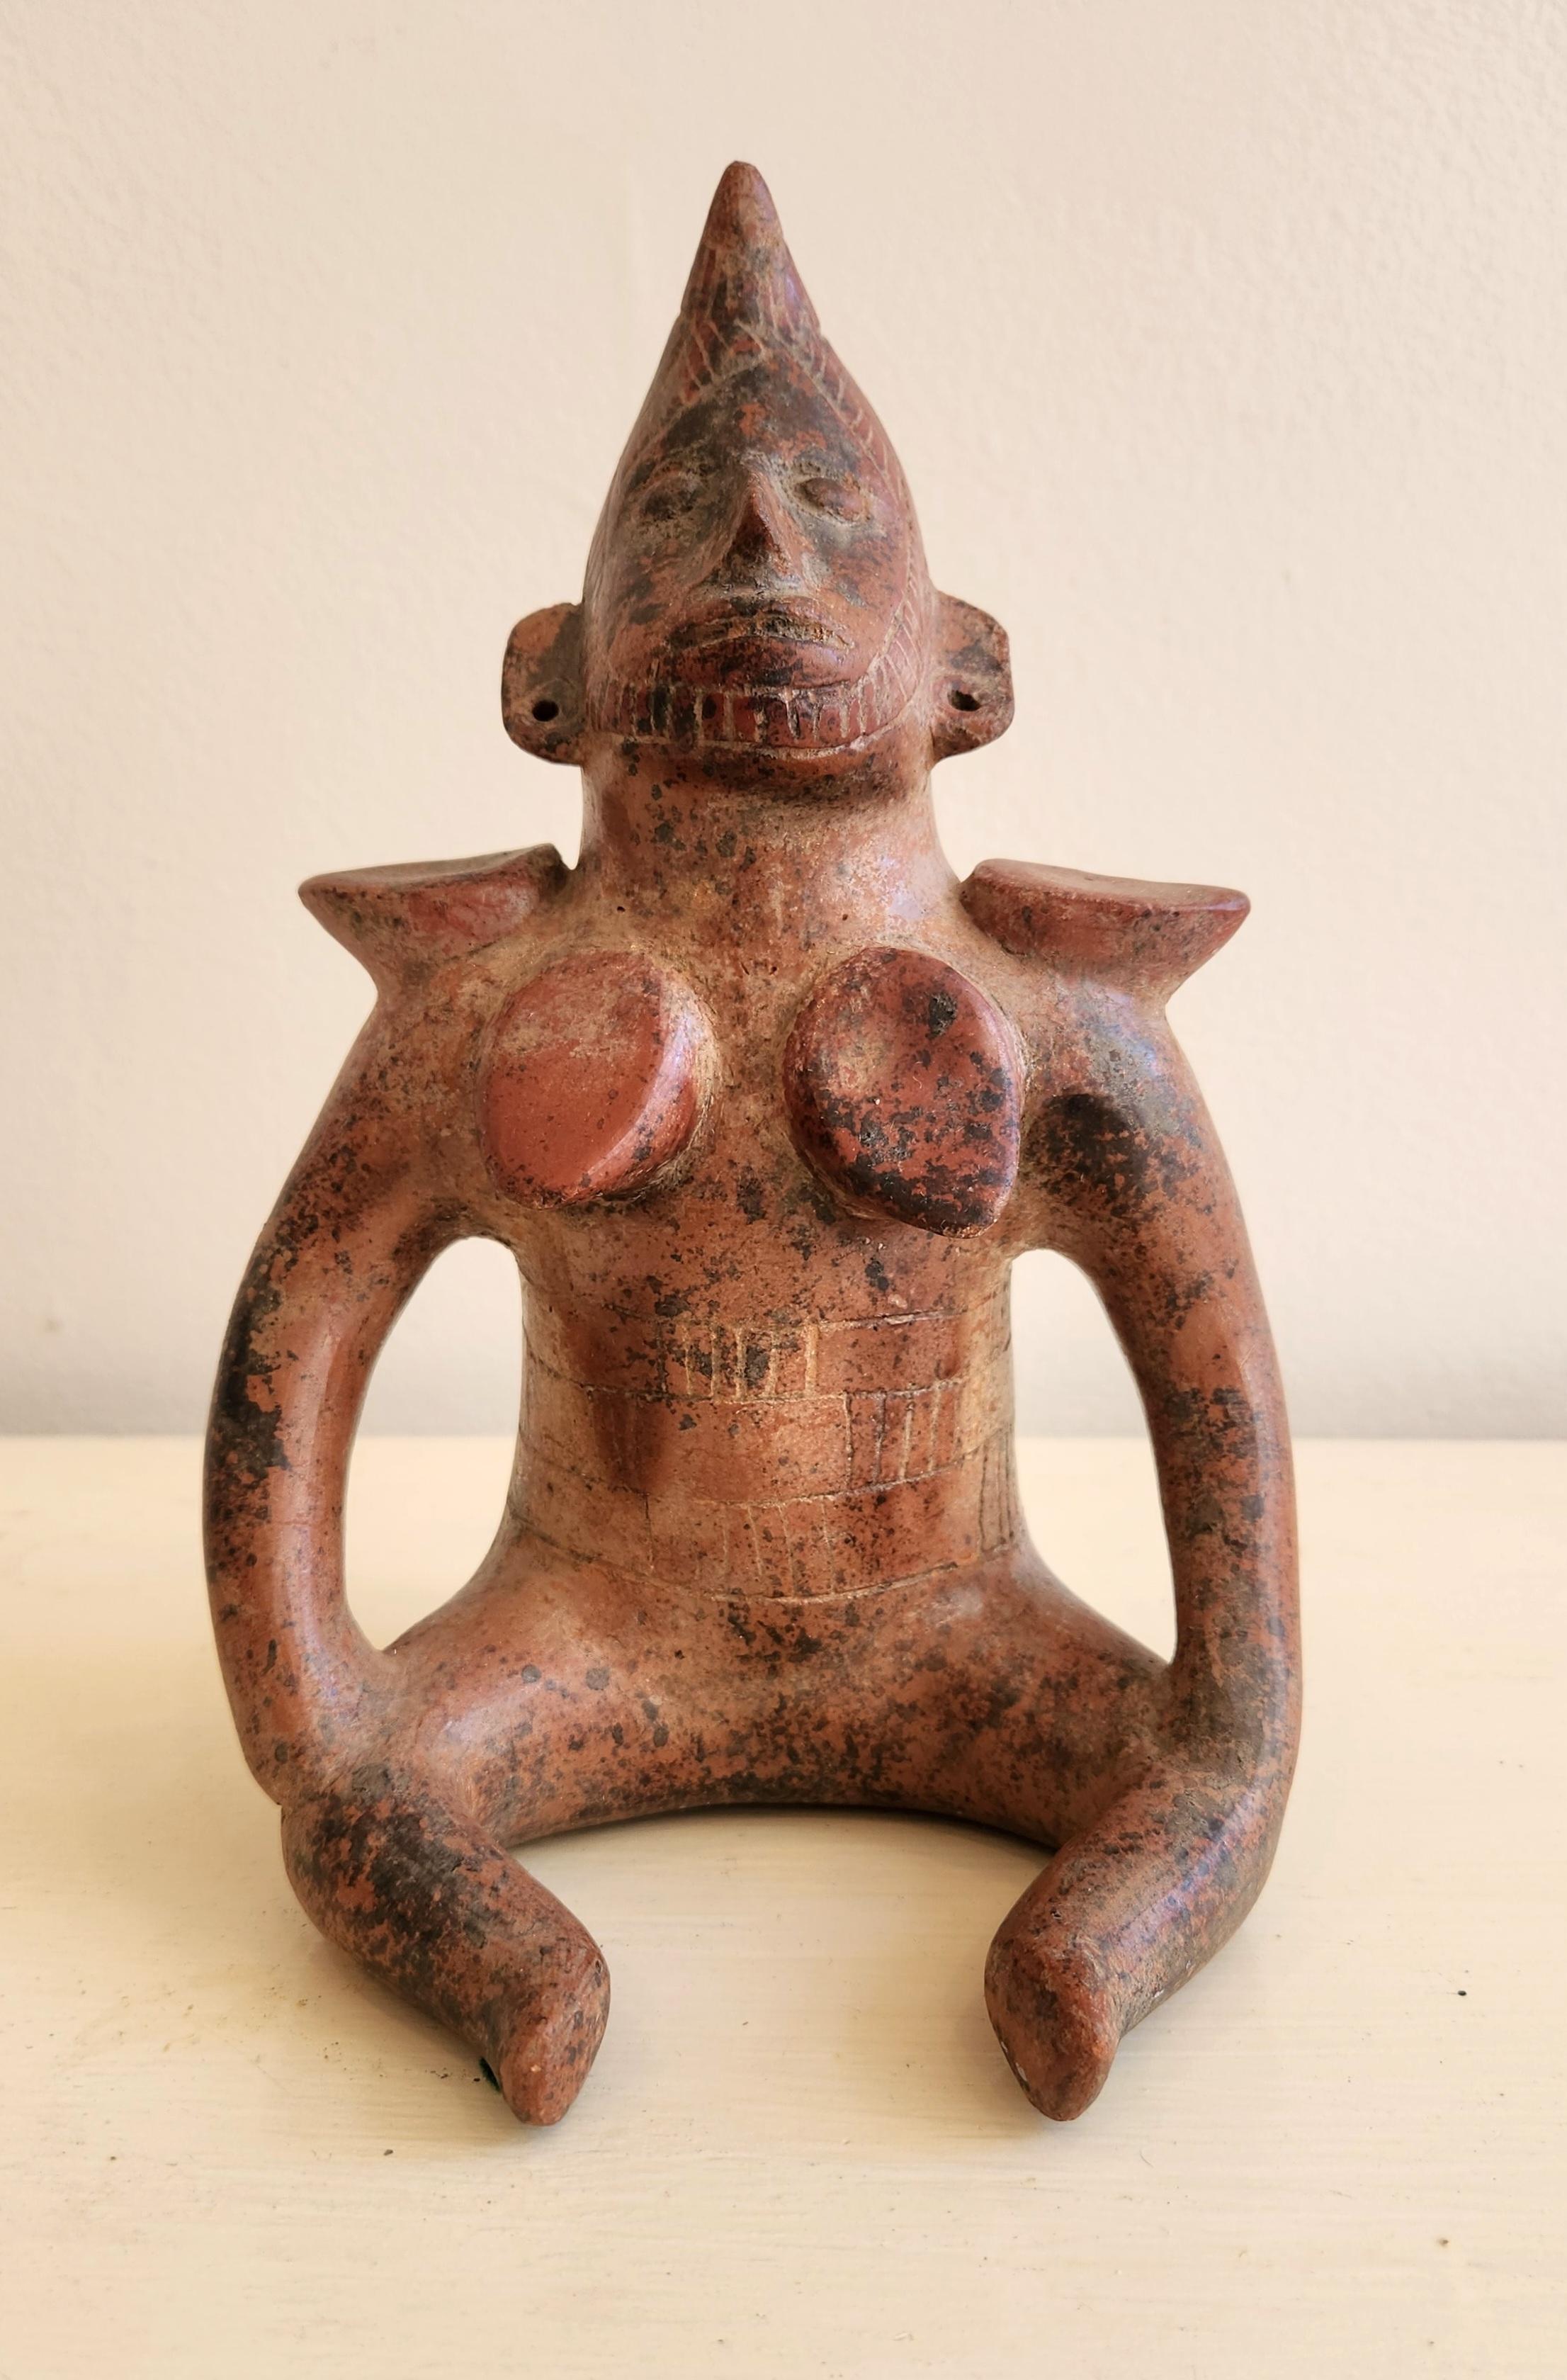 Clay Sculpture in Pre-Colombian Style Reproduction - Folk Art Art by Unknown